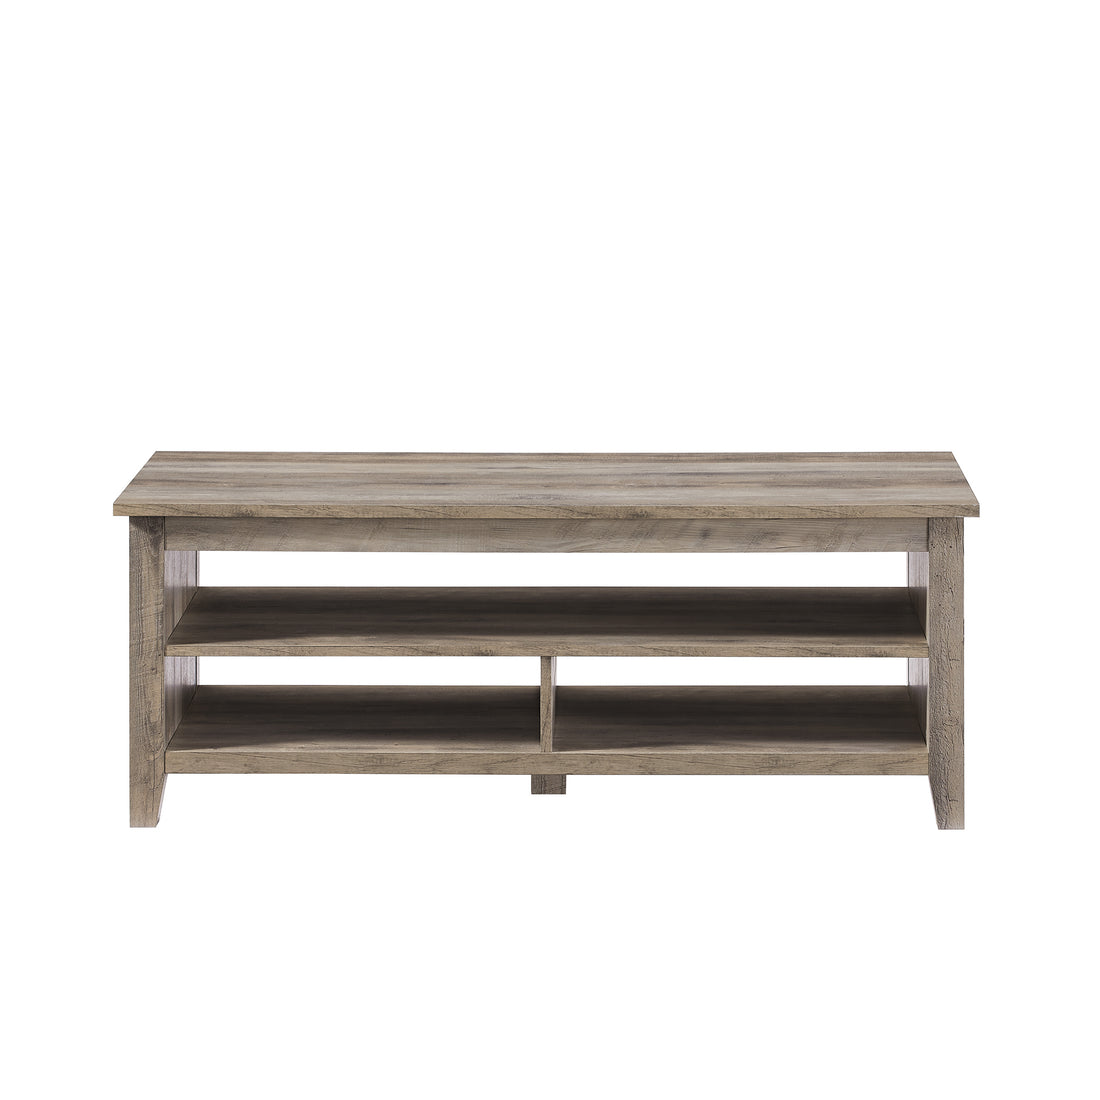 Coastal Grooved Panel Coffee Table With Lower